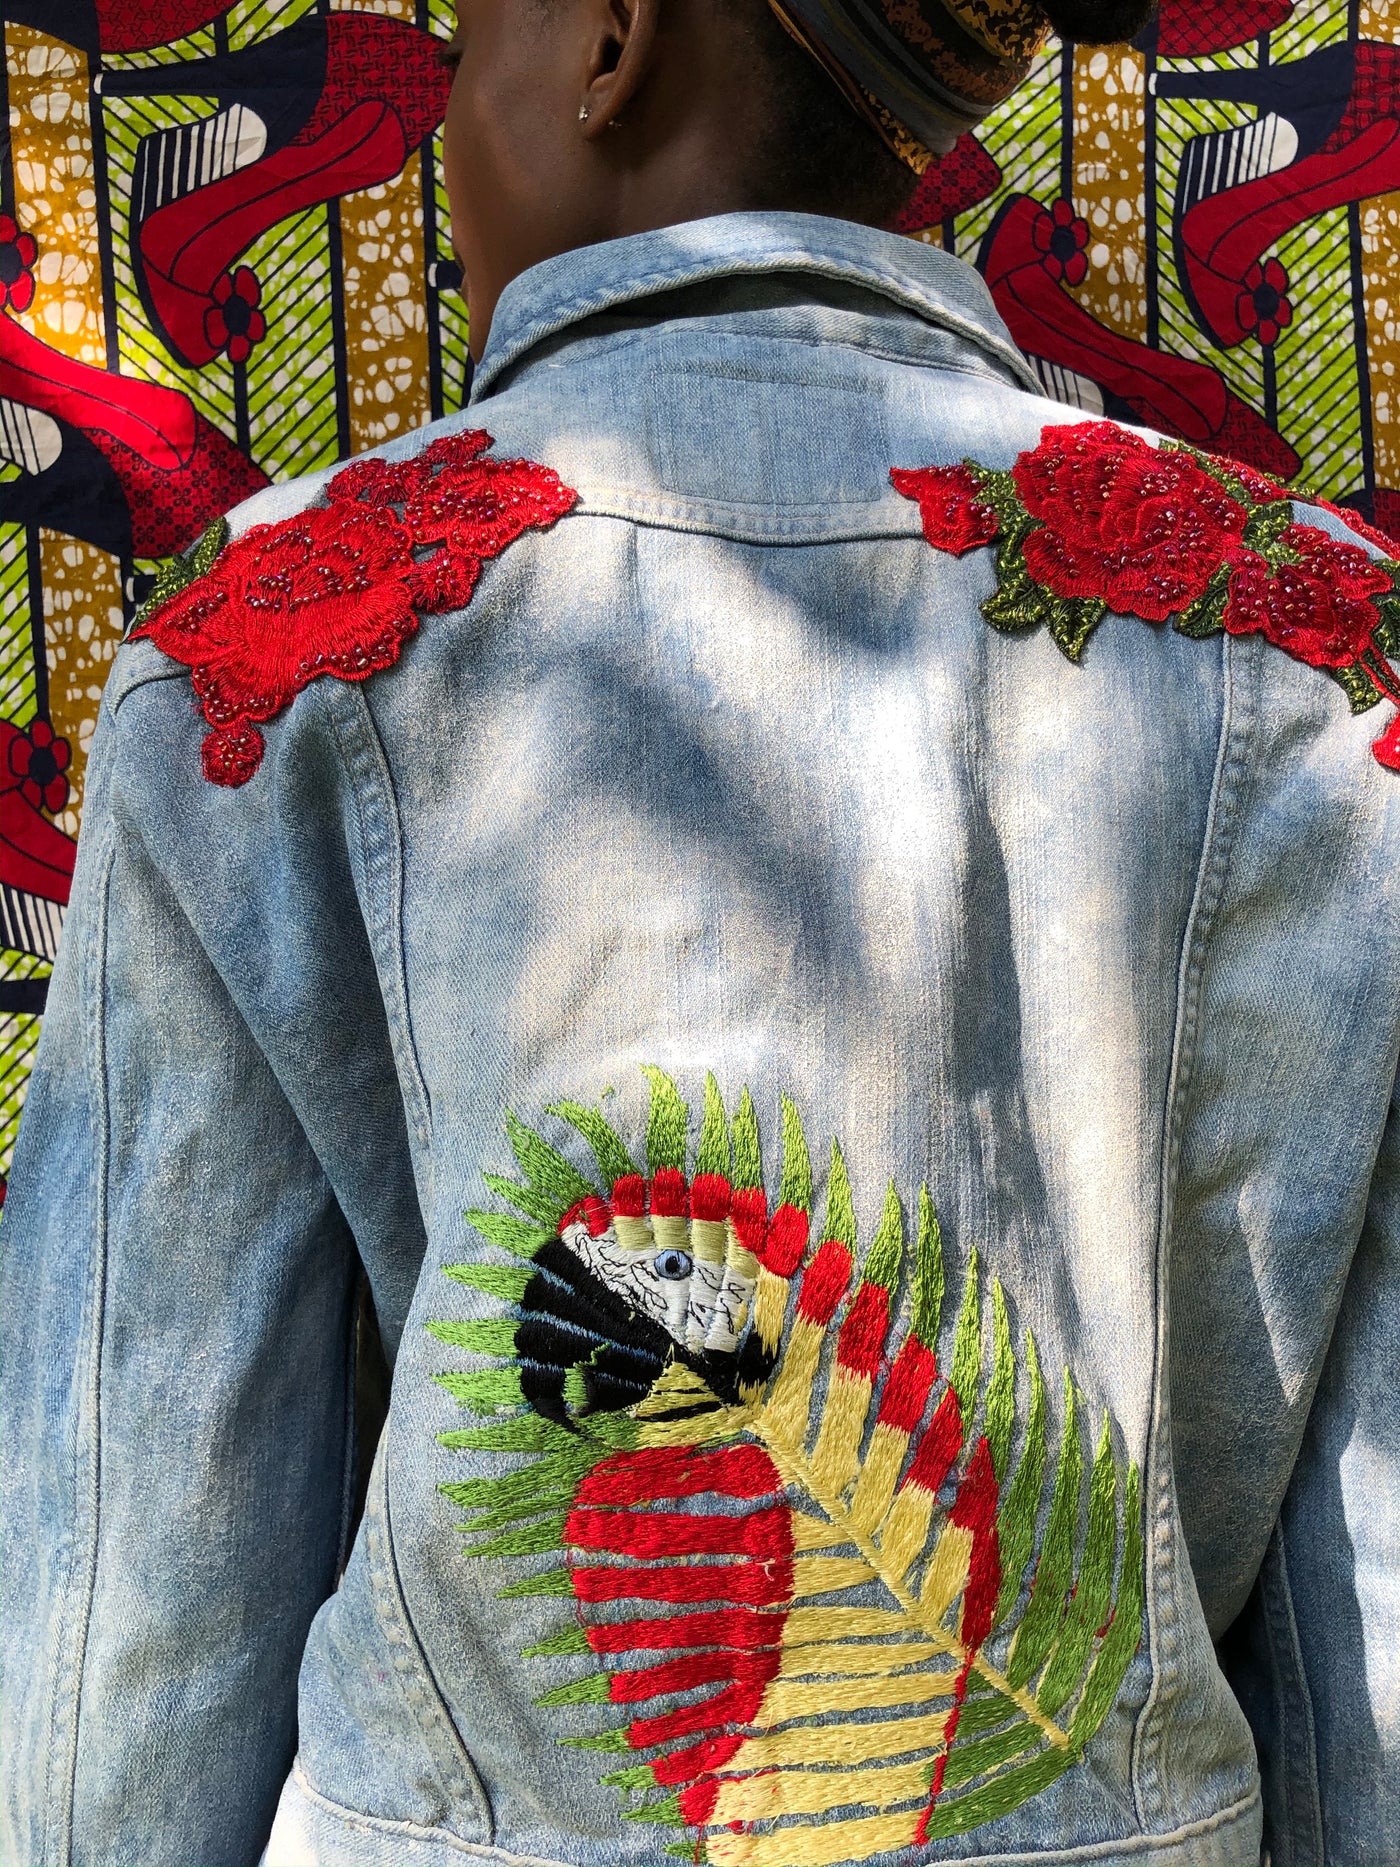 It features wire and bead embellishment design along with a pocket flap with a unique parrot design